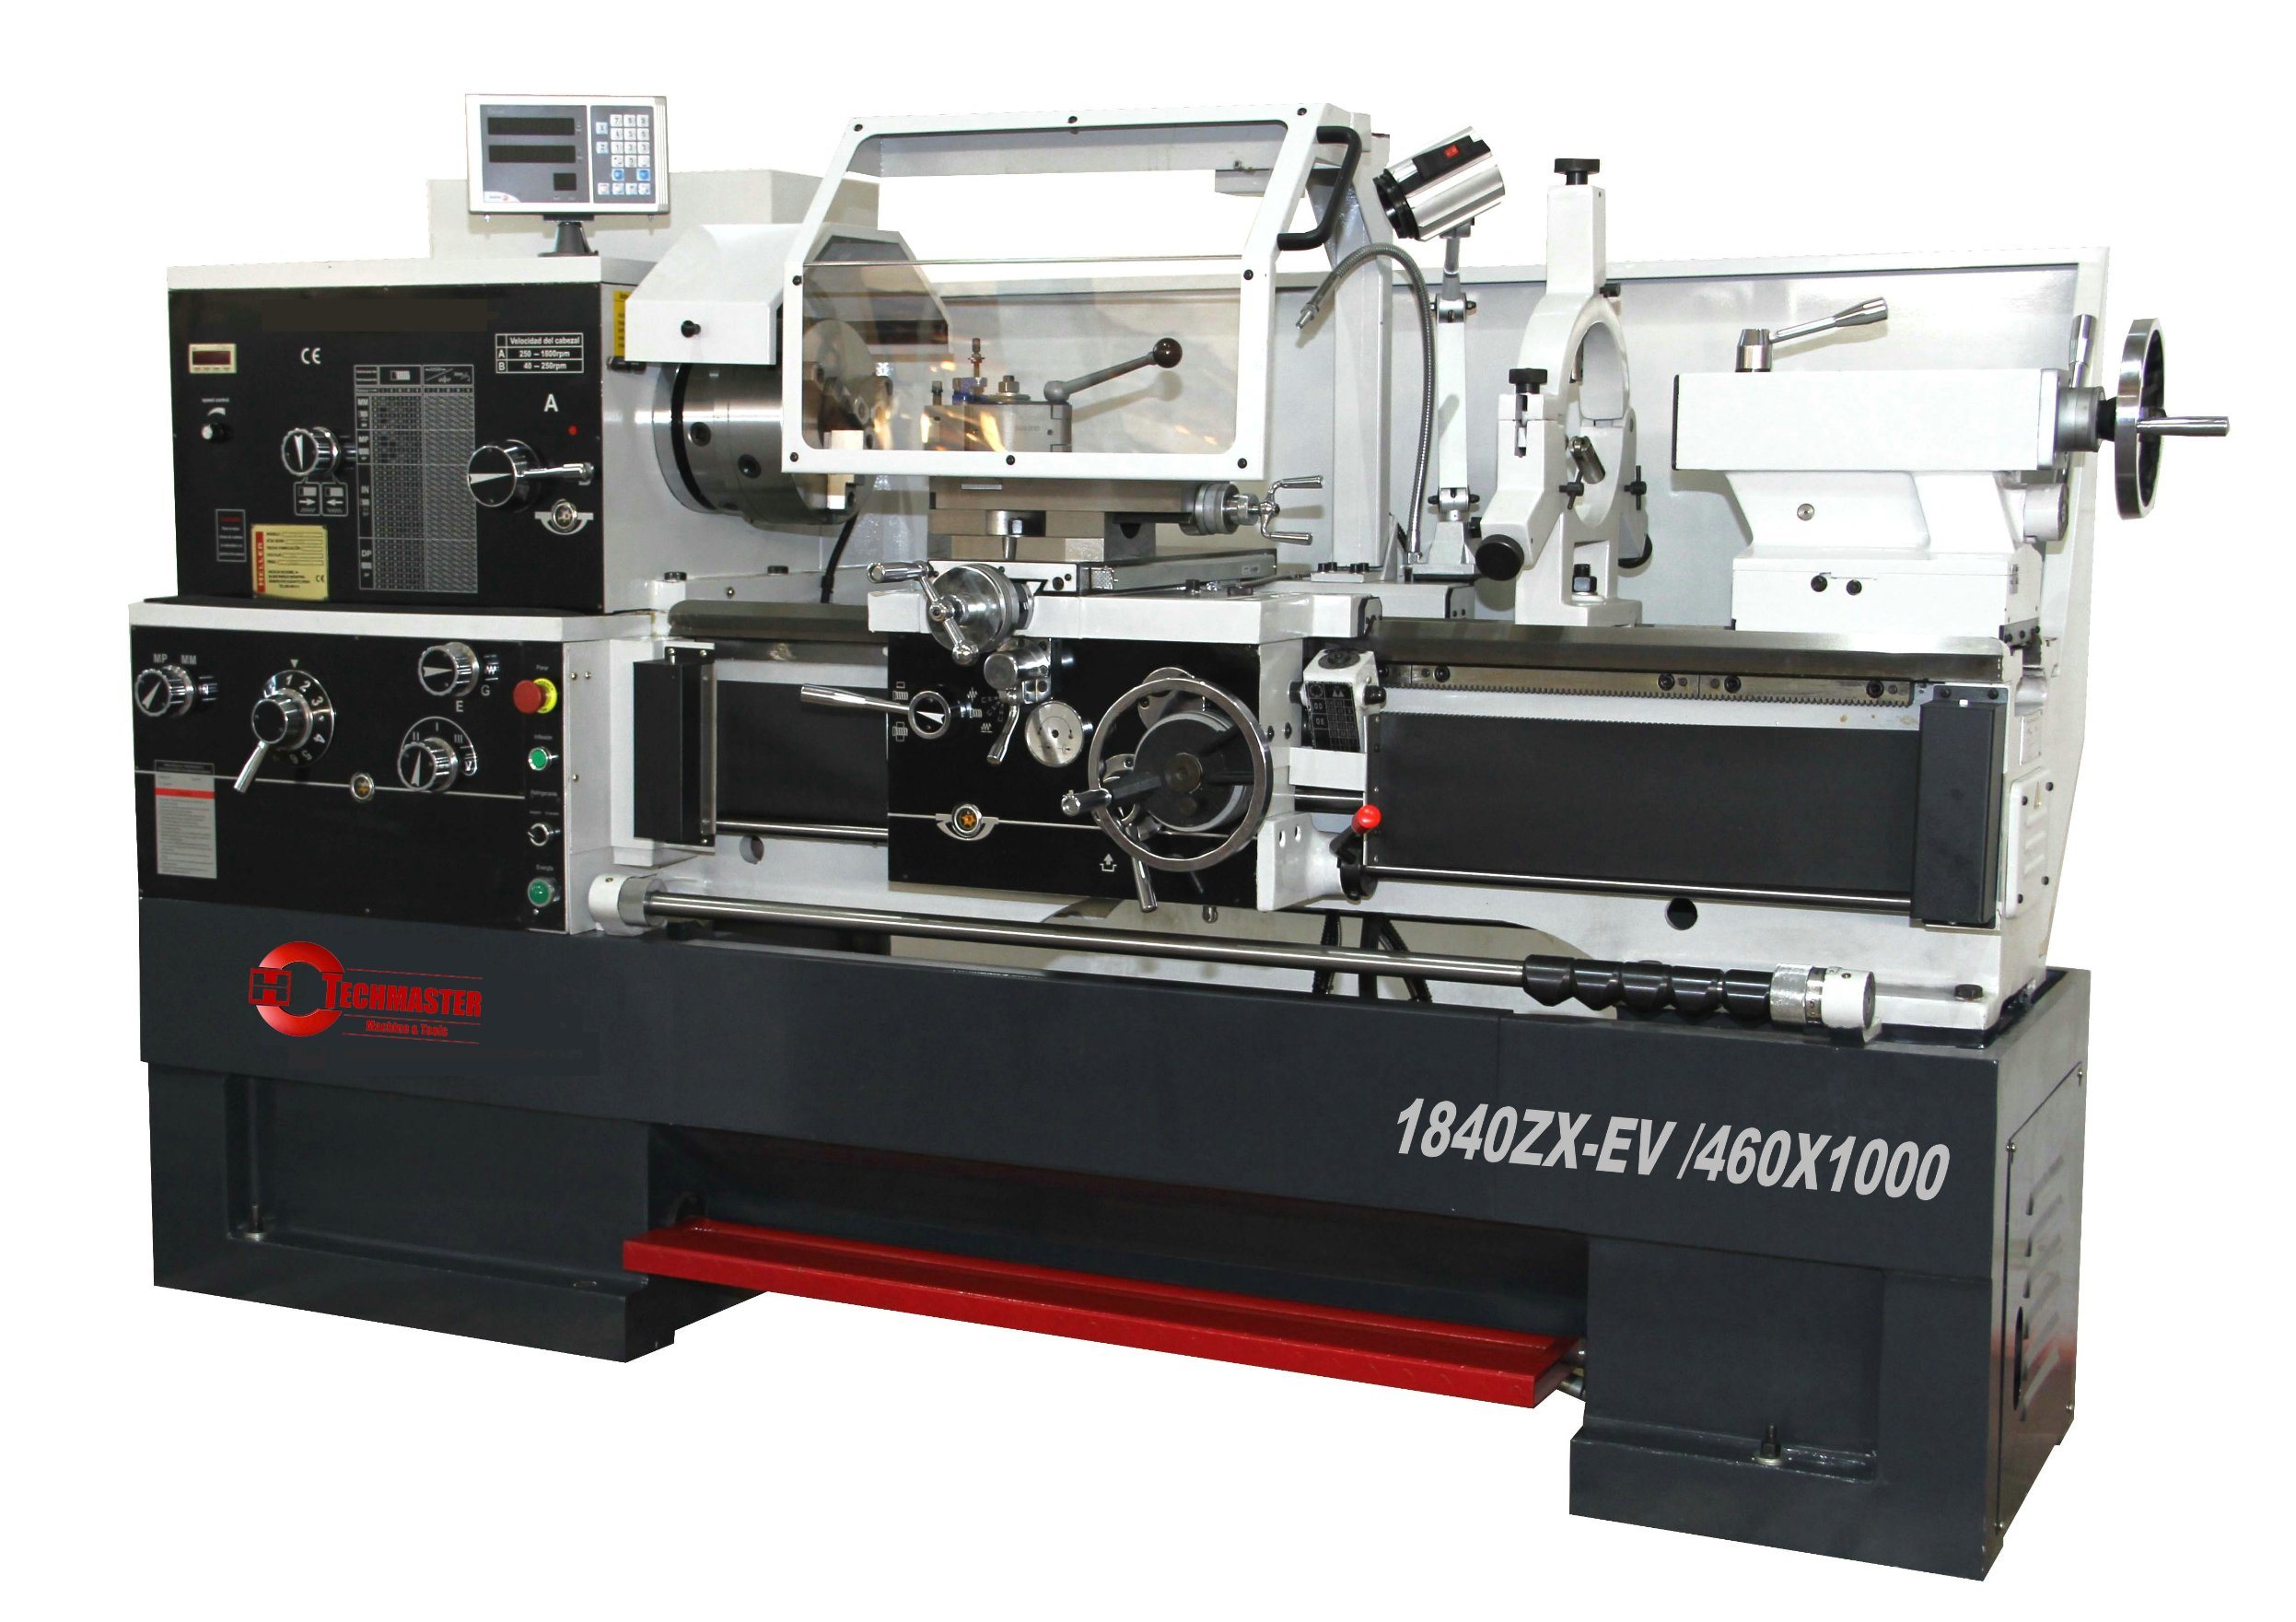 VARIABLE SPEED CONVENTIONAL LATHE ZX EVS SERIES 